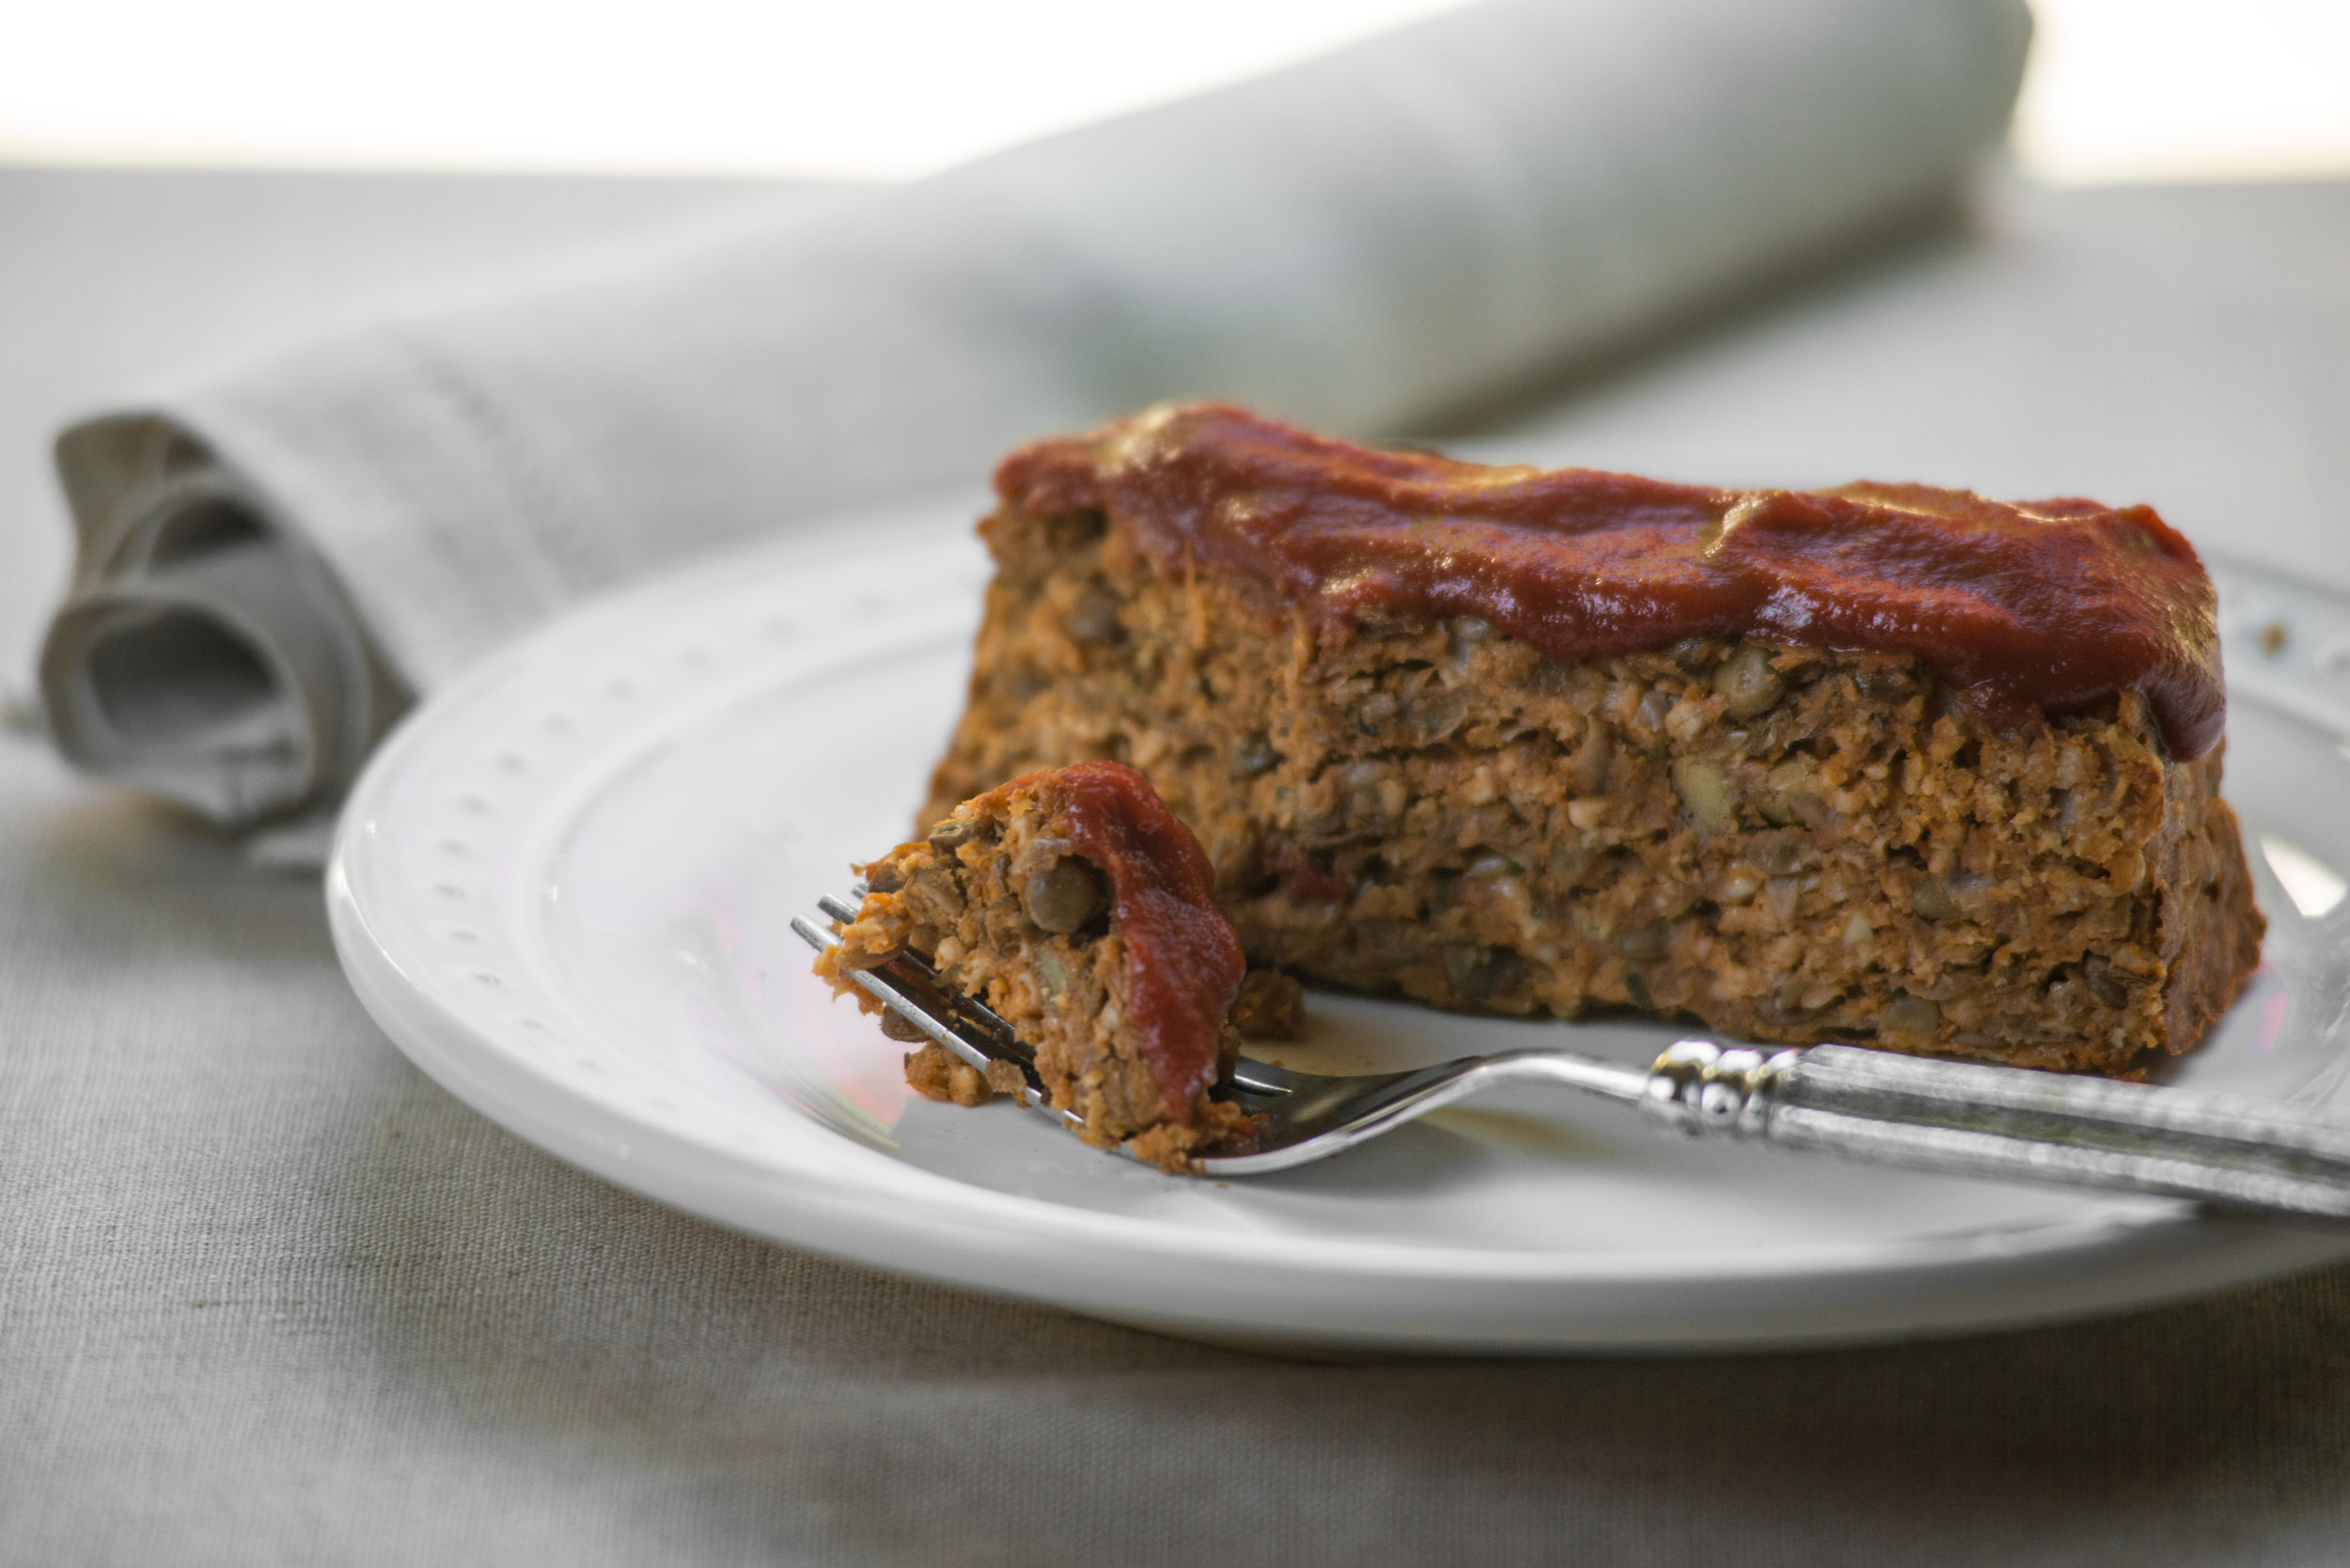 Vegetarian Lentil Loaf with Tomato-Maple BBQ Sauce